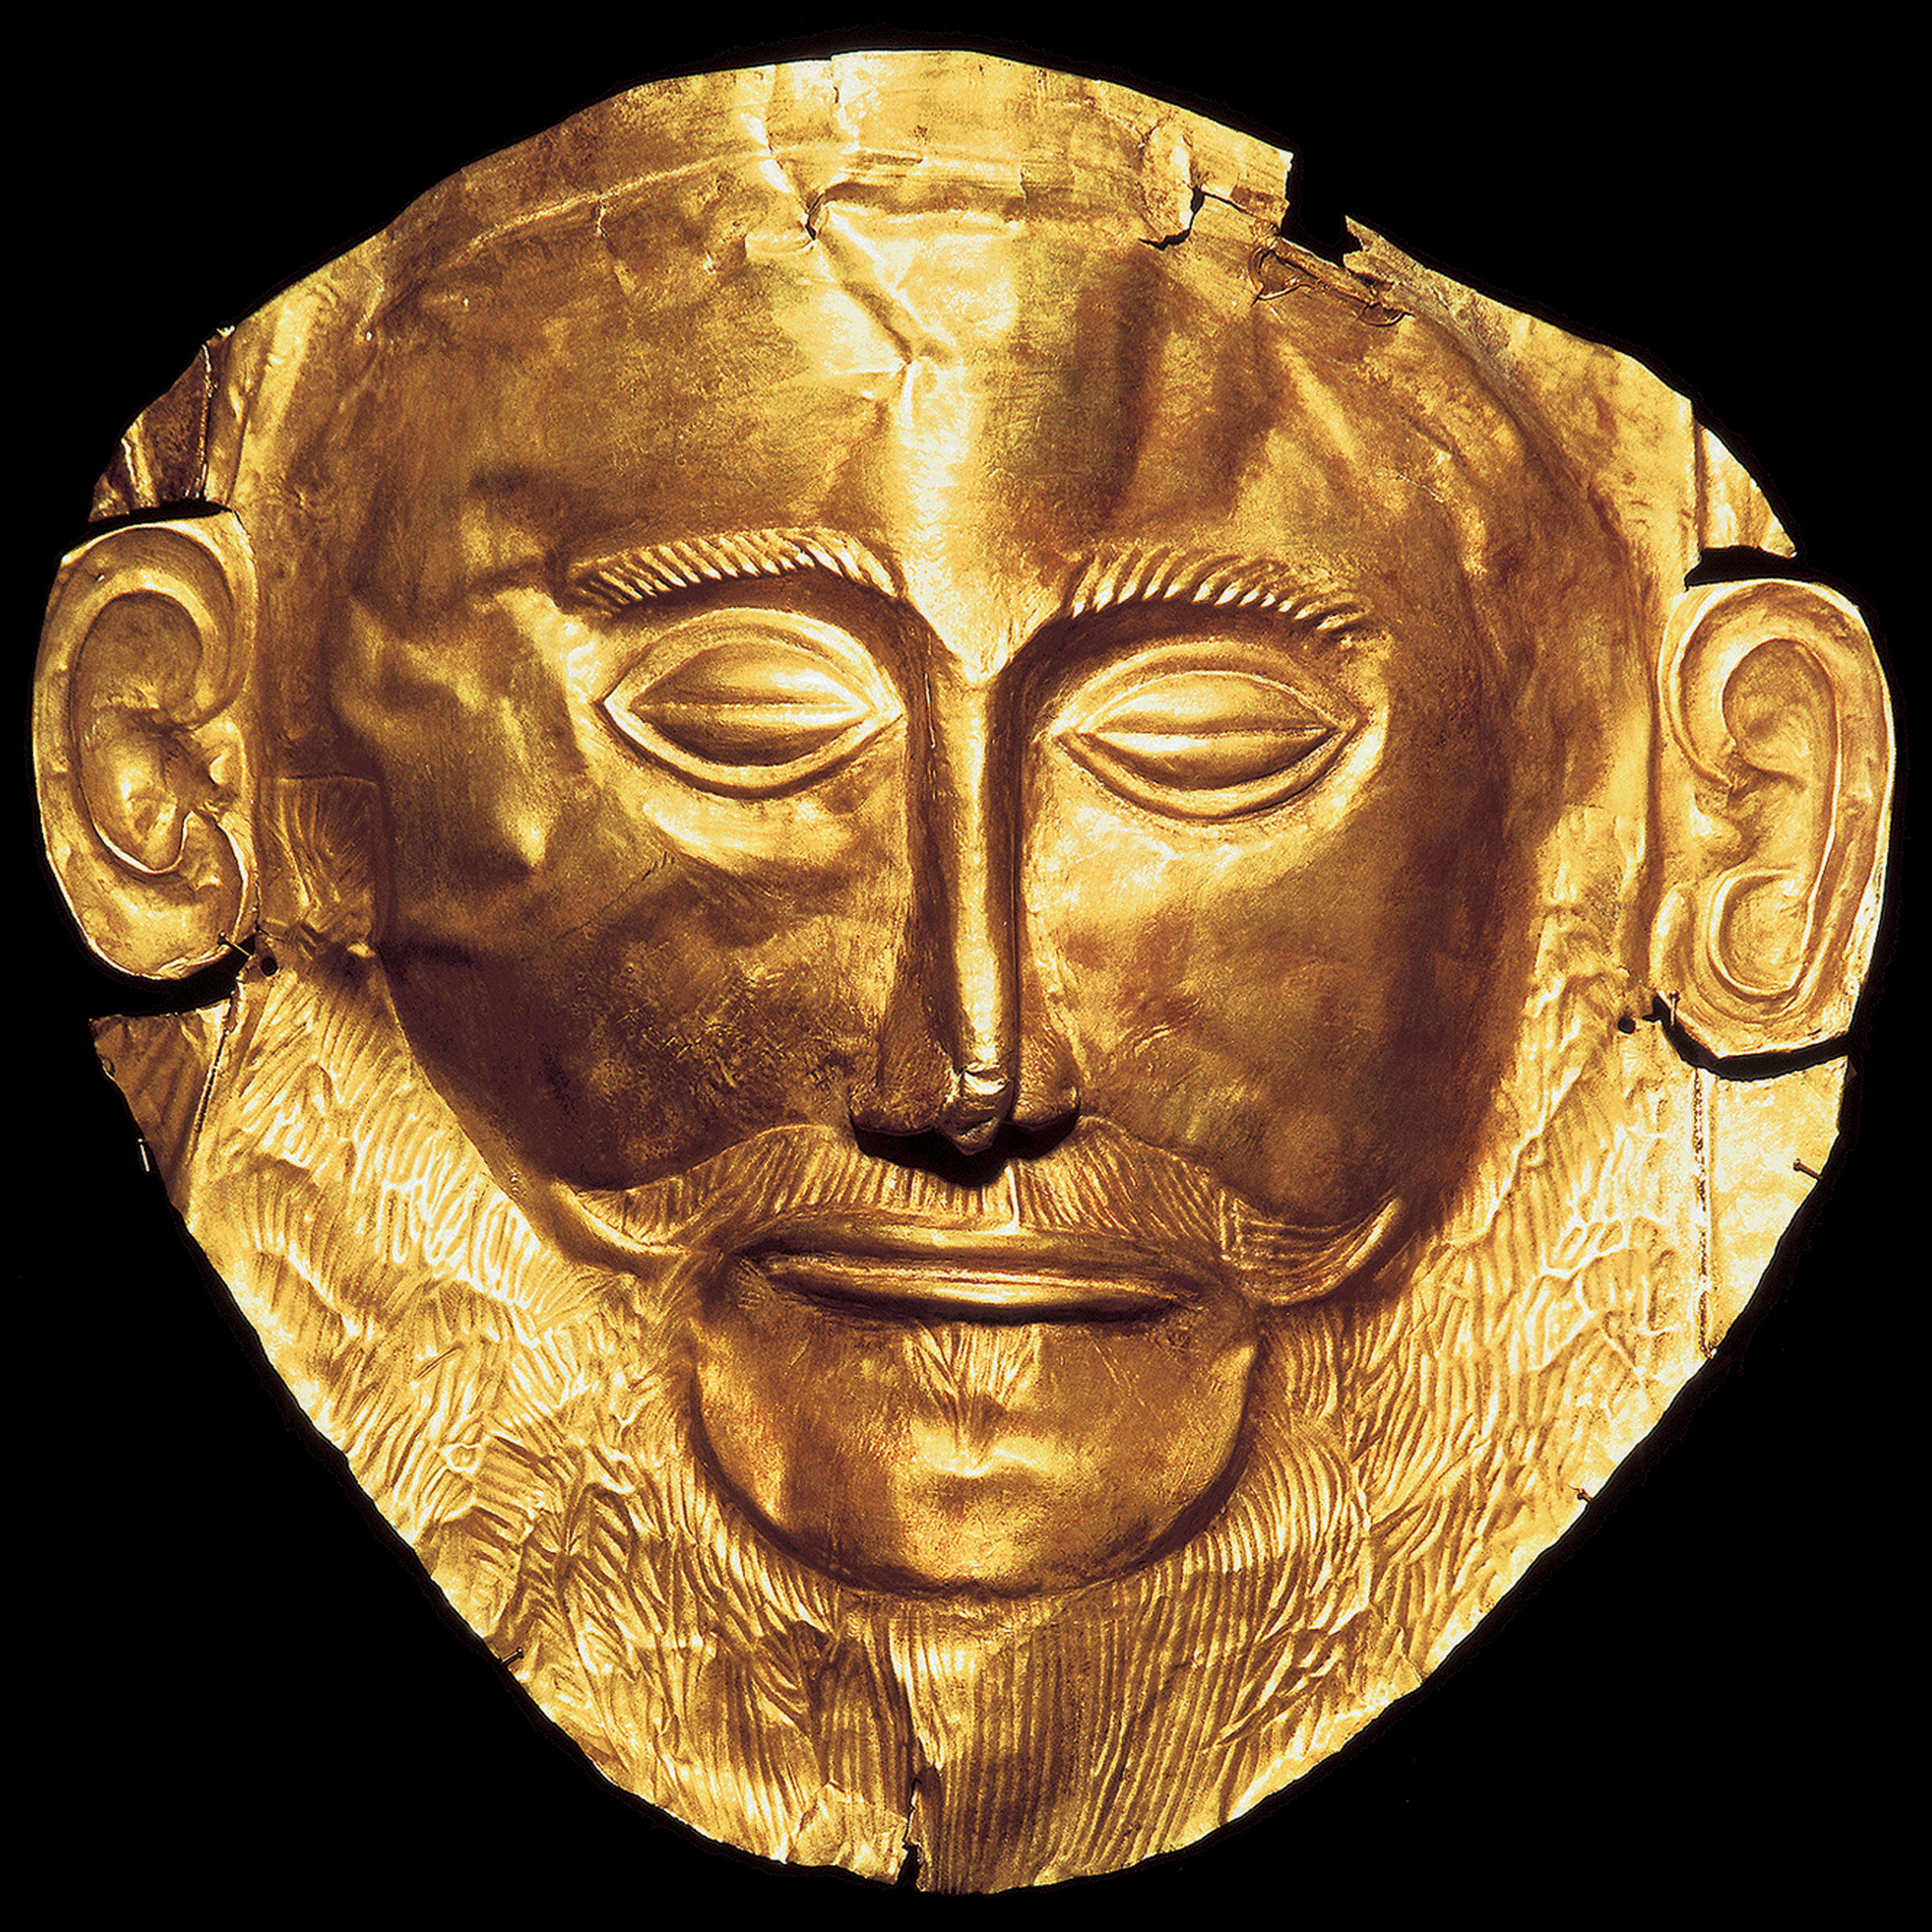 Funerary mask from the royal tombs, National Archaeological Museum, Athens, Greece